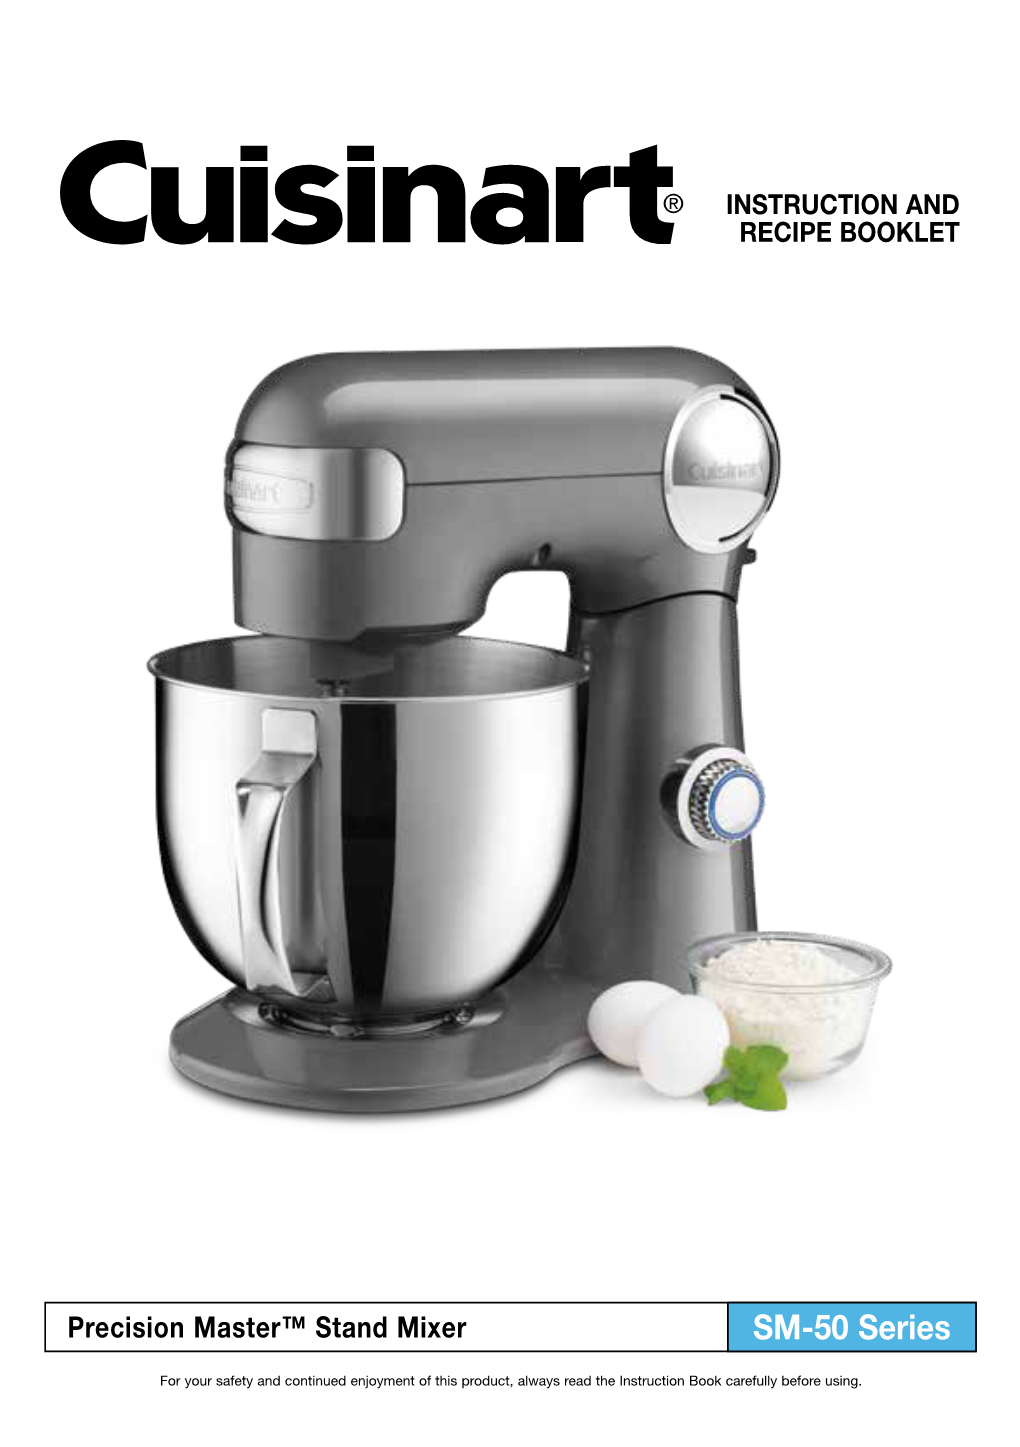 Cuisinart Precision Master Stand Mixer SM-50 Series Instruction And